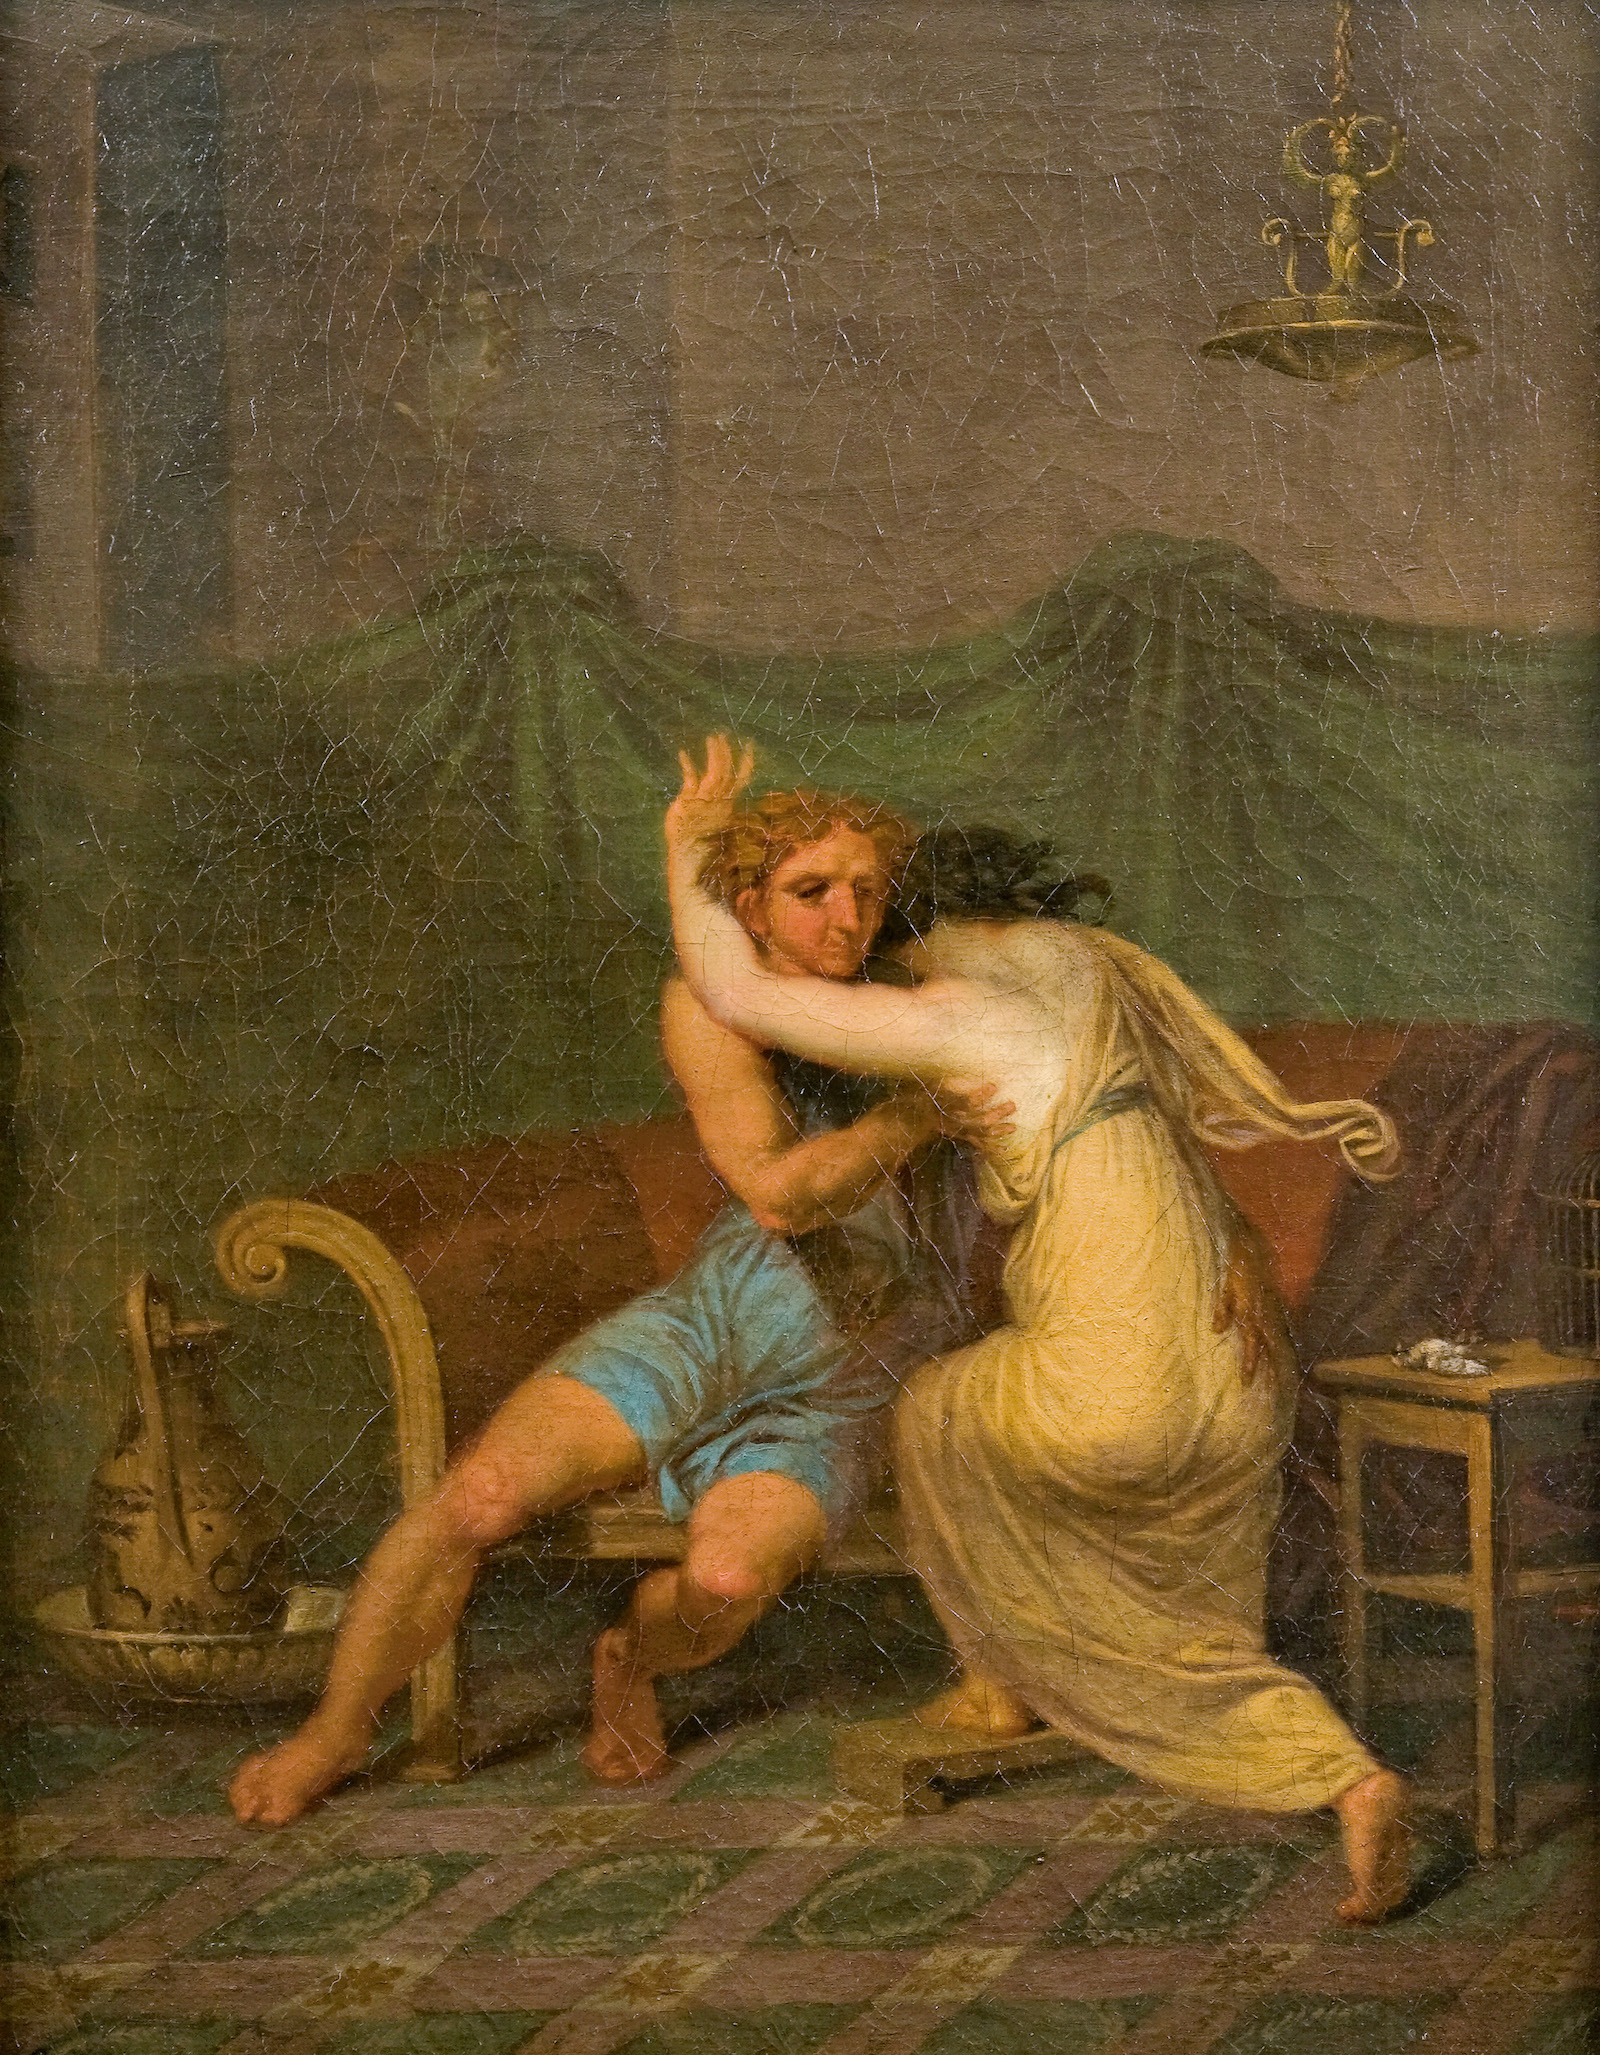 ‘Catullus and Lesbia, who in his arms seek solace for the death of her sparrow’ by Nicolai Abildgaard, 1809. Nivaagaard Museum. Public Domain.